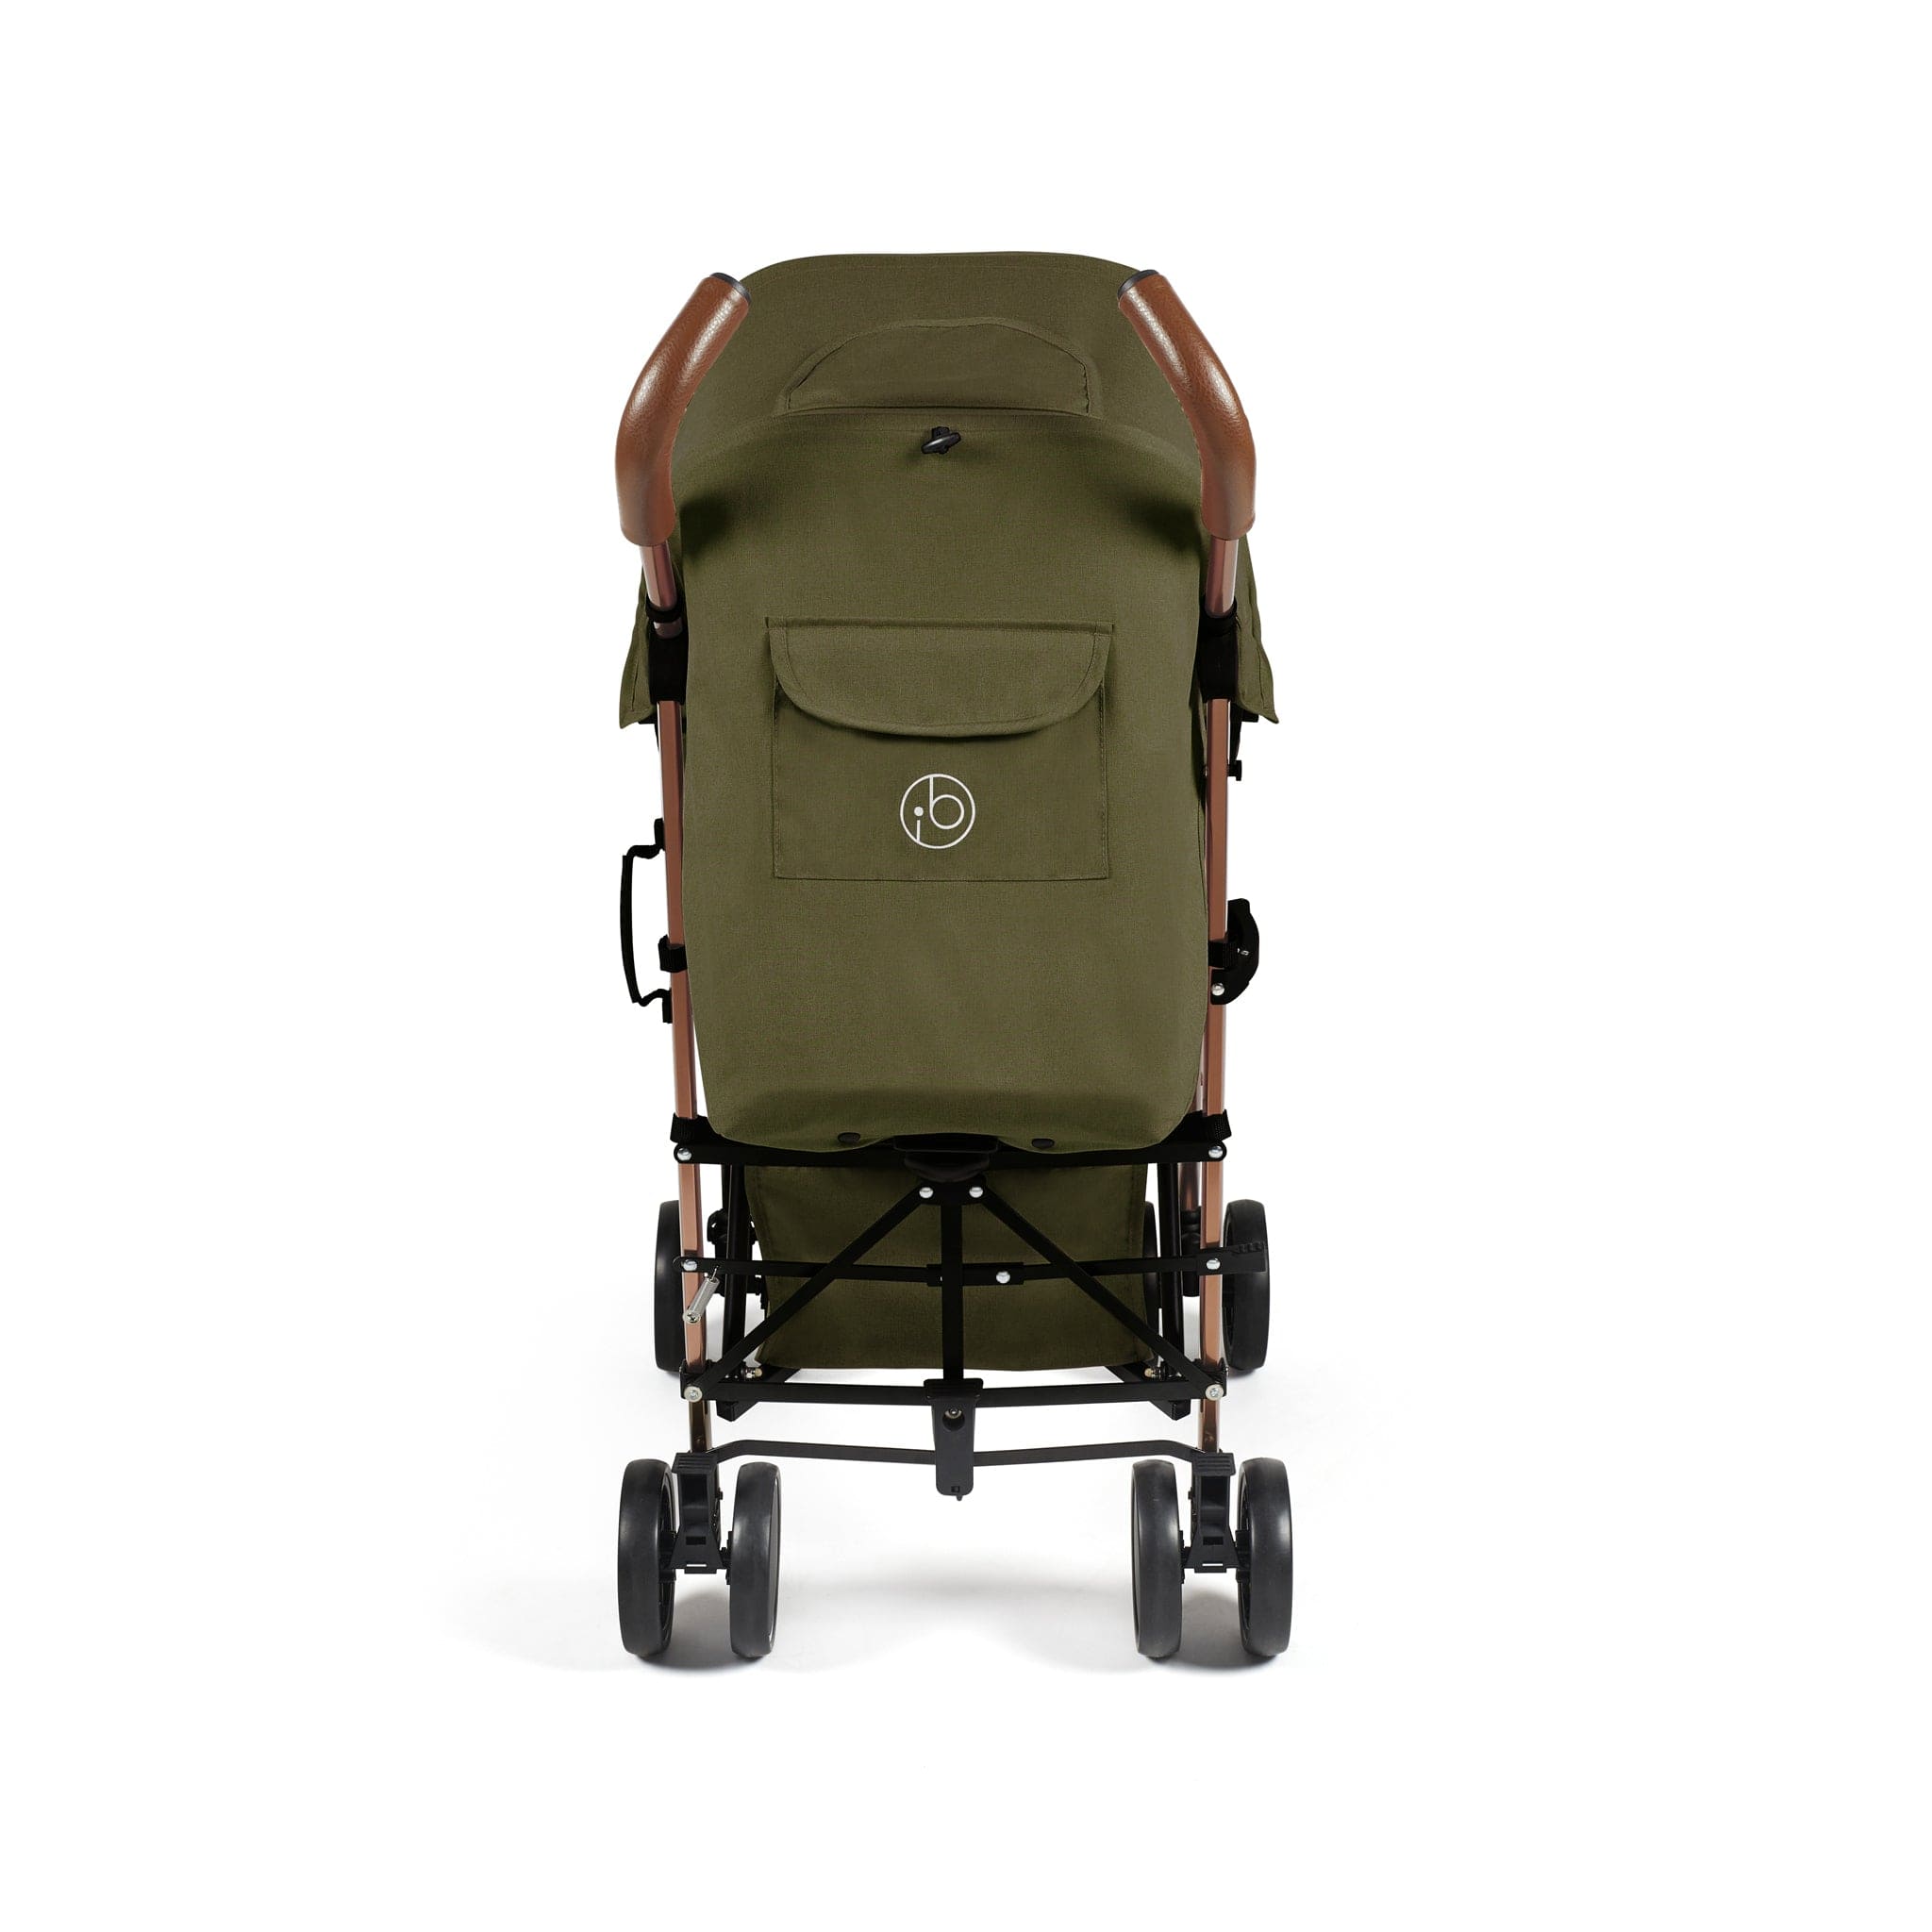 Ickle Bubba baby pushchairs Ickle Bubba Discovery Pushchair Rose Gold/Khaki 15-002-100-045